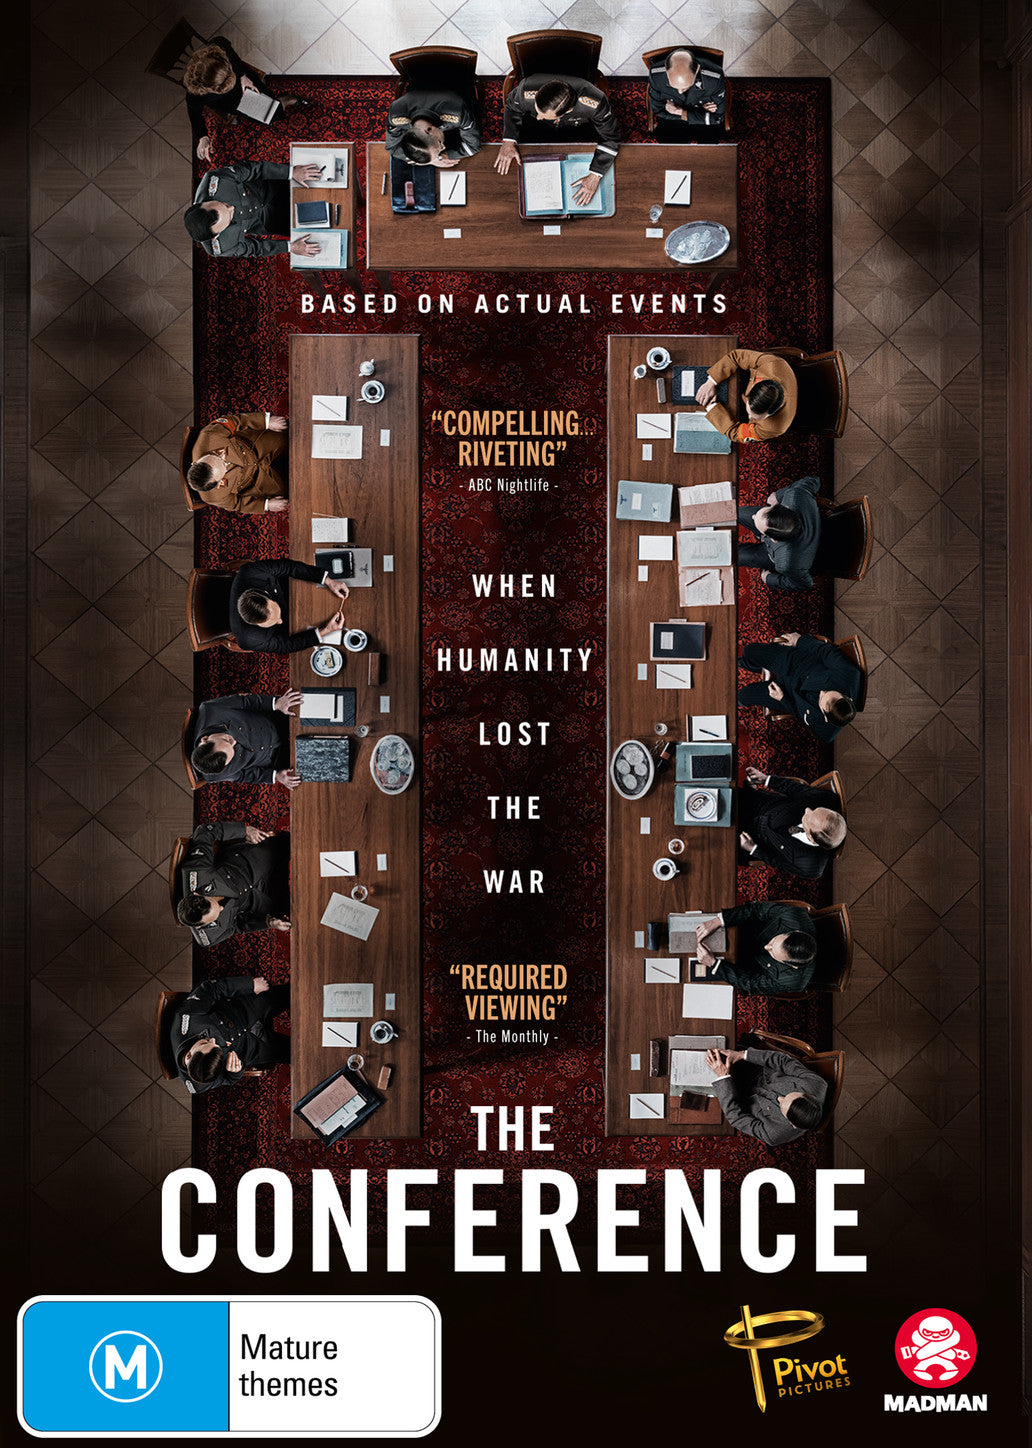 THE CONFERENCE